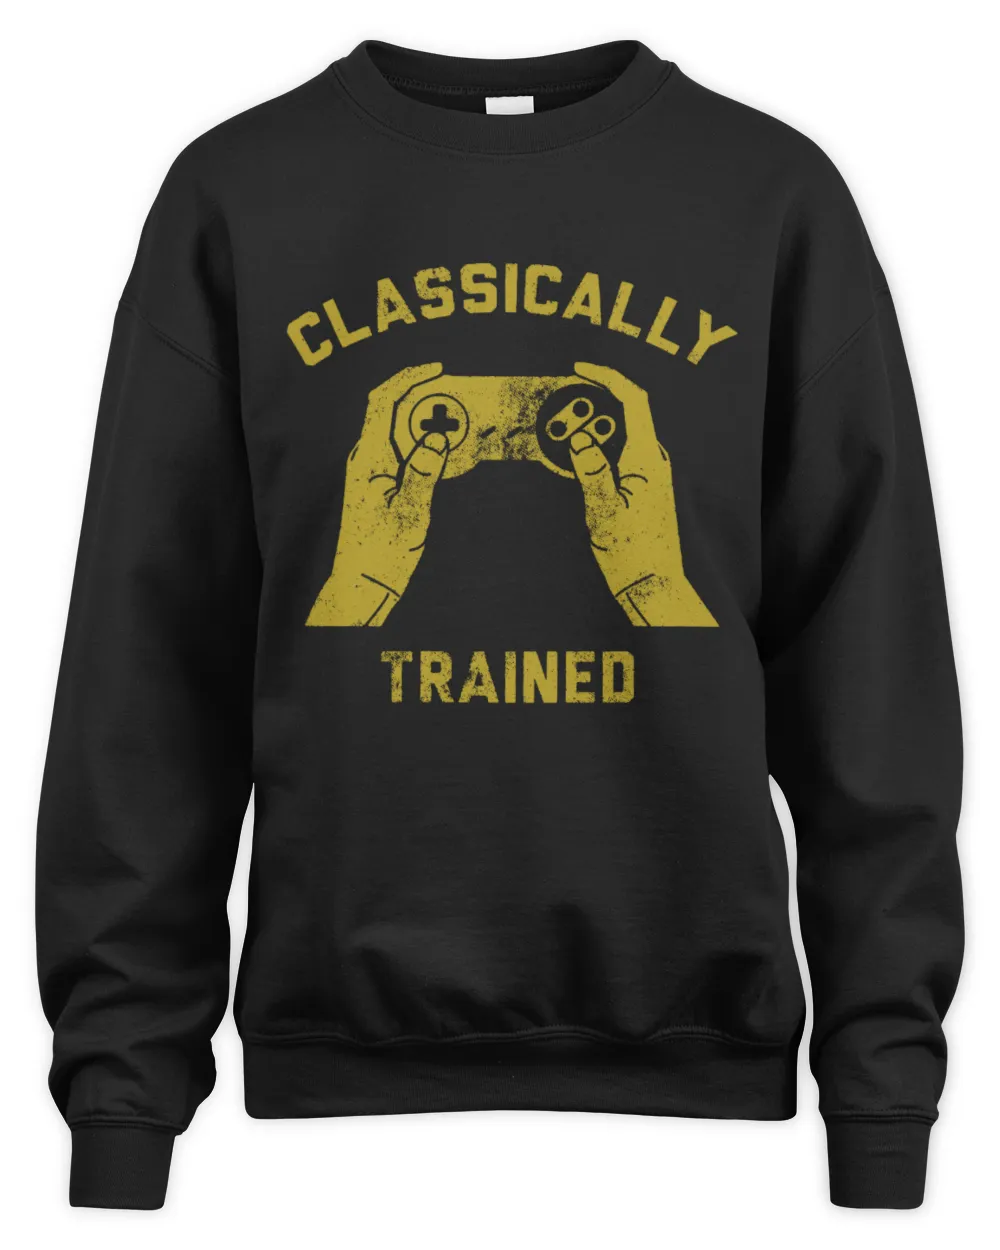 Gamer Shirt, Video Game Shirt, Gamer Gift, Nerdy Shirts, Shirts For Gamers, Funny Gaming Shirt, Classically Trained, Vintage Gaming Systems